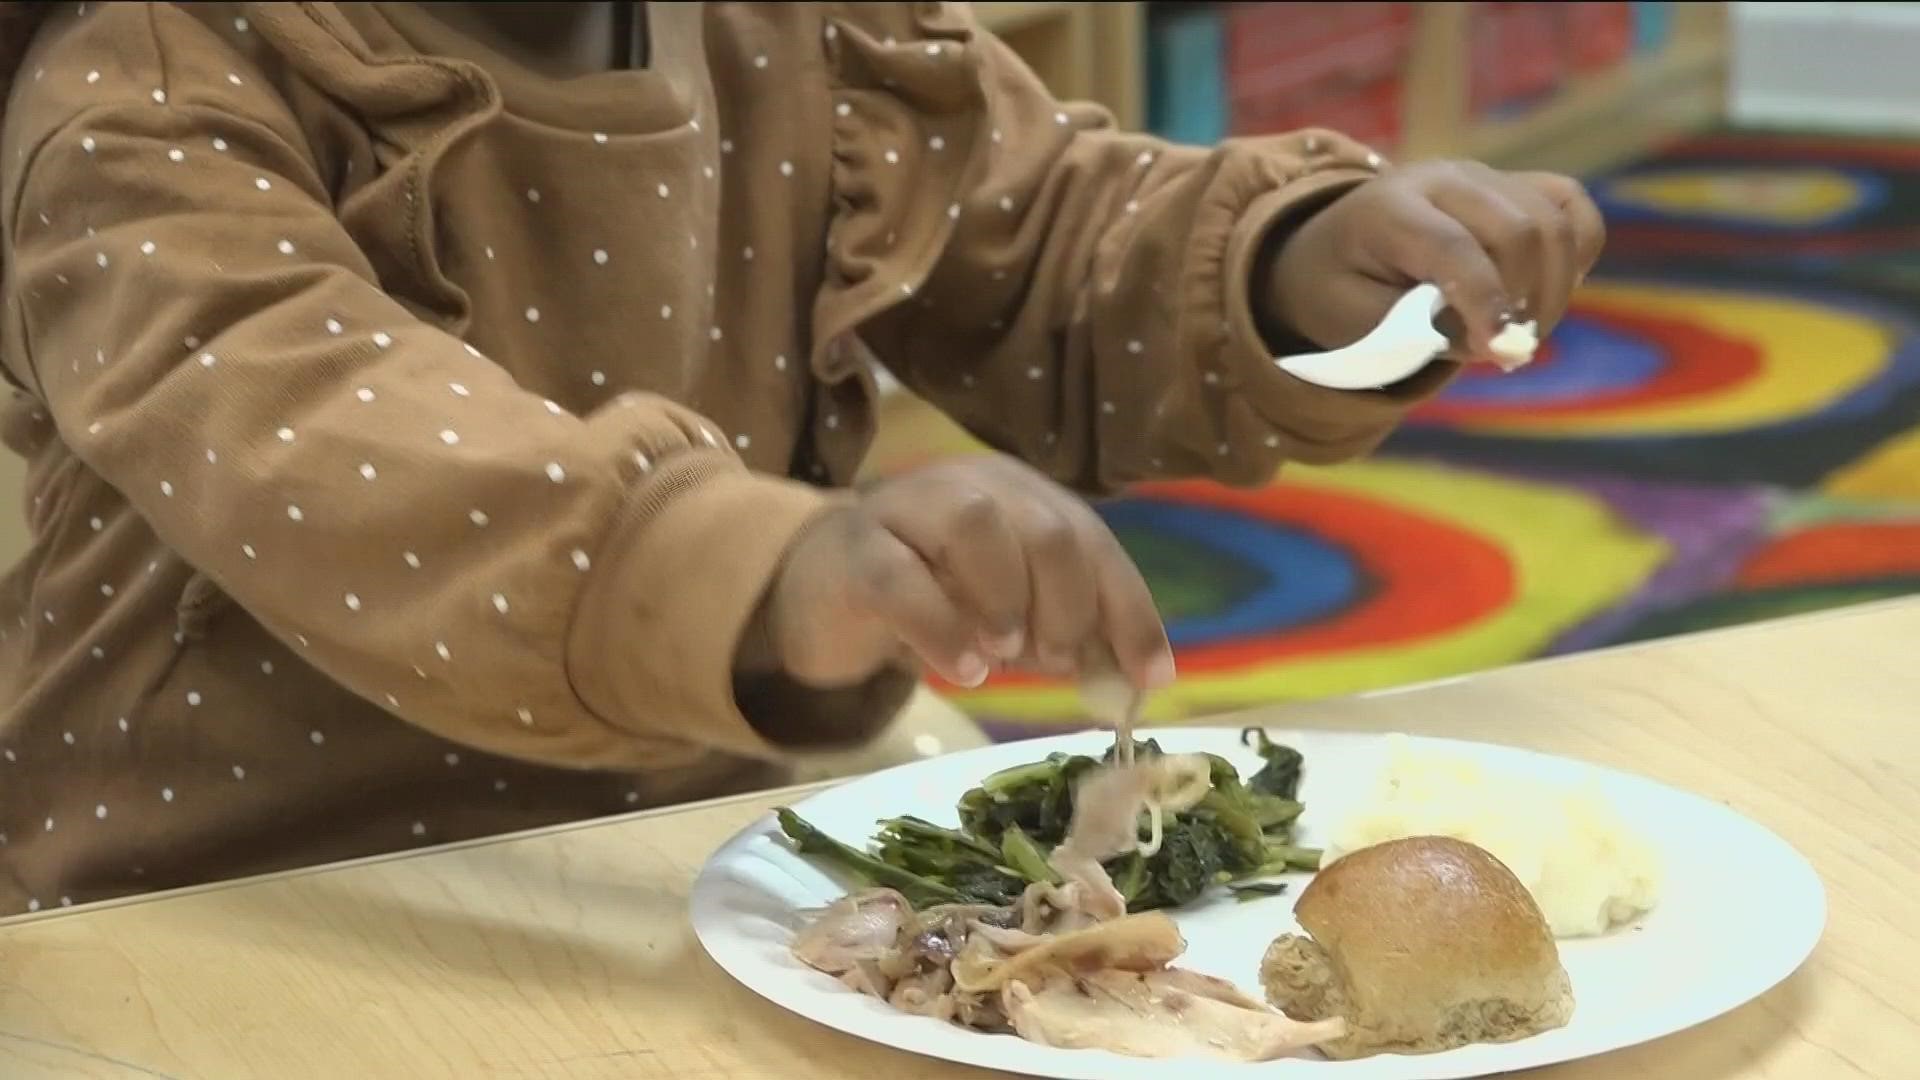 Quality Care for Children helps sponsor more than 600 childcare programs across Georgia, reimbursing centers for the cost of healthy meals and snacks.